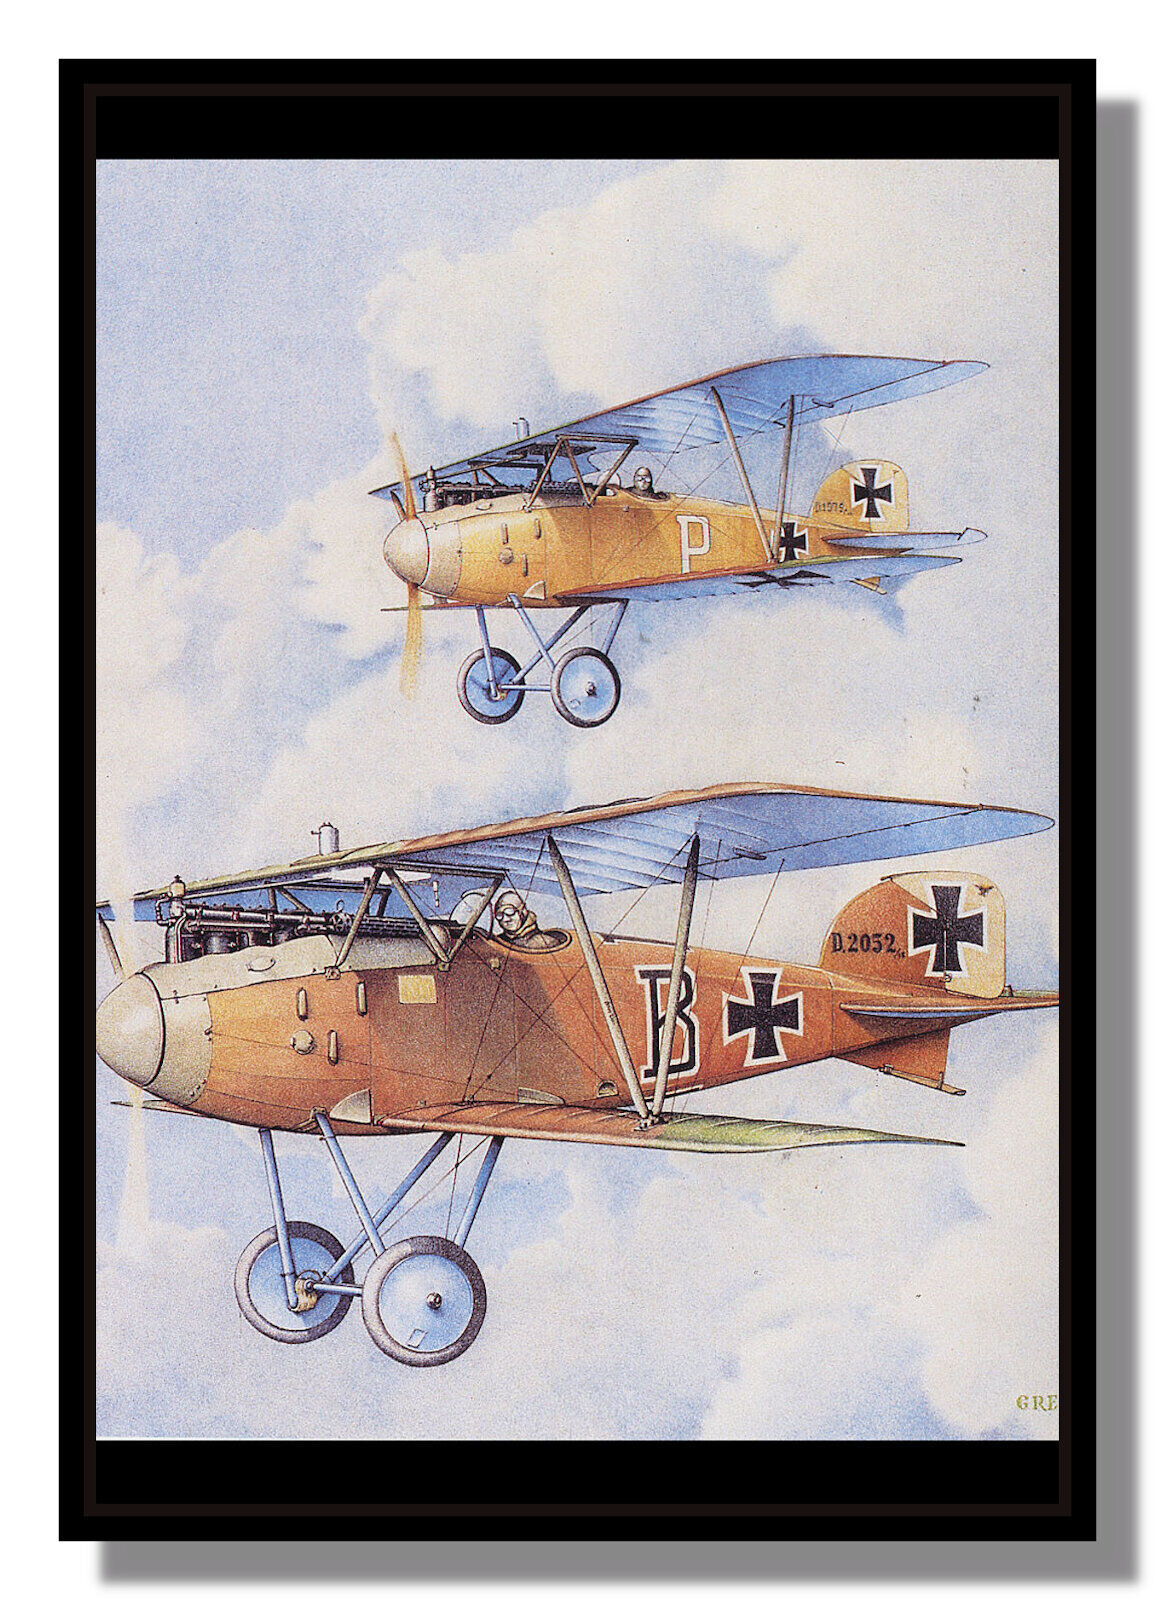 Albatros DIII fighters Jasta 29 WW1 framed picture free p&p UK